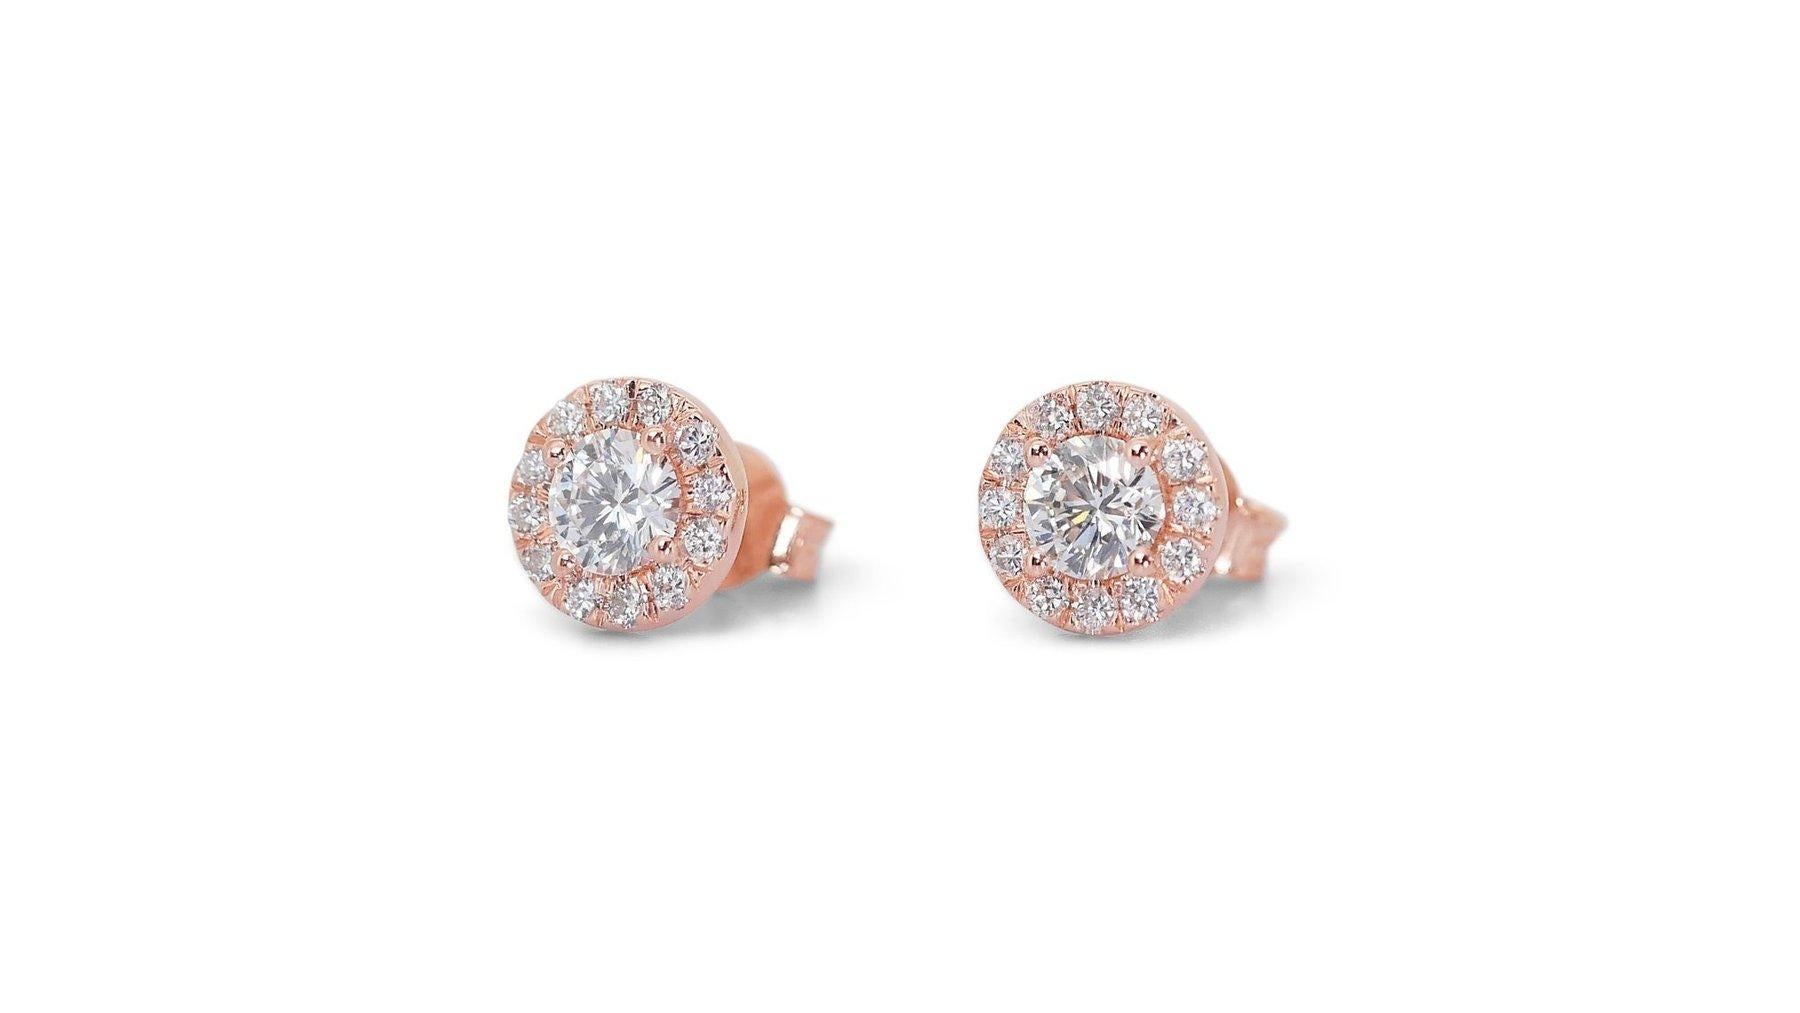 Sophisticated 2.31ct Diamonds Halo Stud Earrings in 18k Rose Gold - GIA Certified

Indulge in the epitome of sophistication with these stunning 18K rose gold halo stud earrings, featuring a mesmerizing pair of round brilliant diamonds totaling 2.01